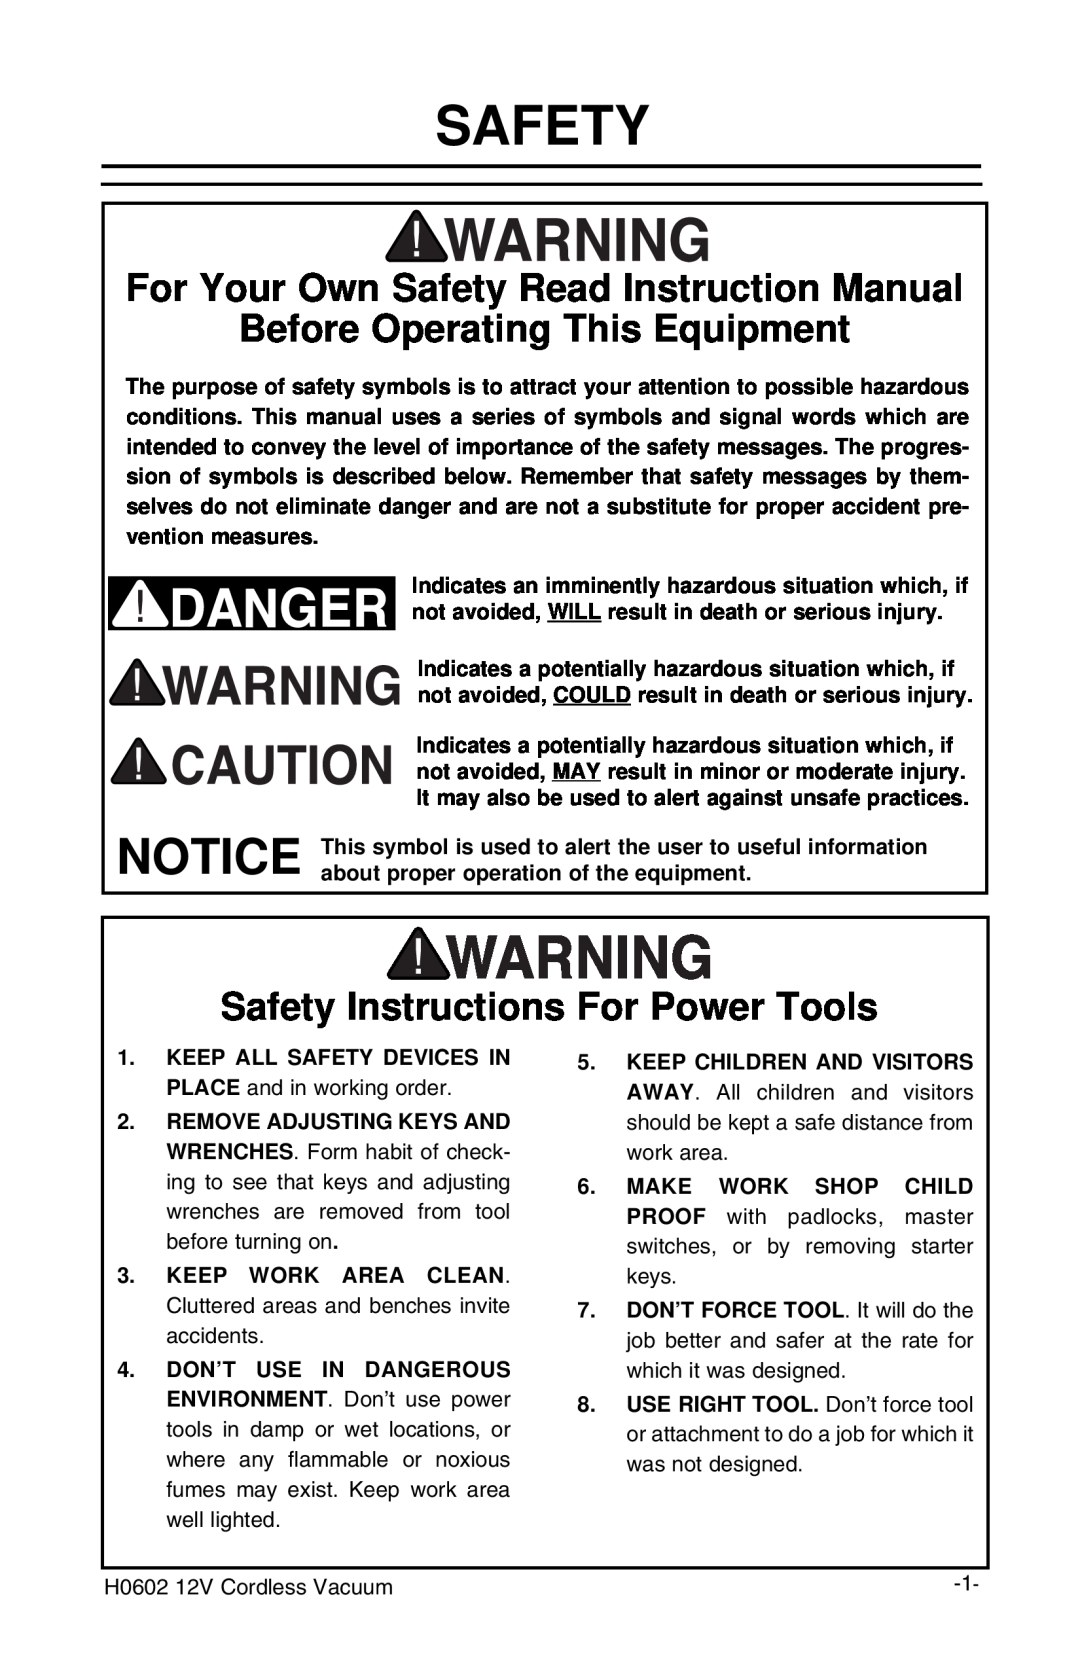 Grizzly H0602 instruction manual Before Operating This Equipment, Safety Instructions For Power Tools 